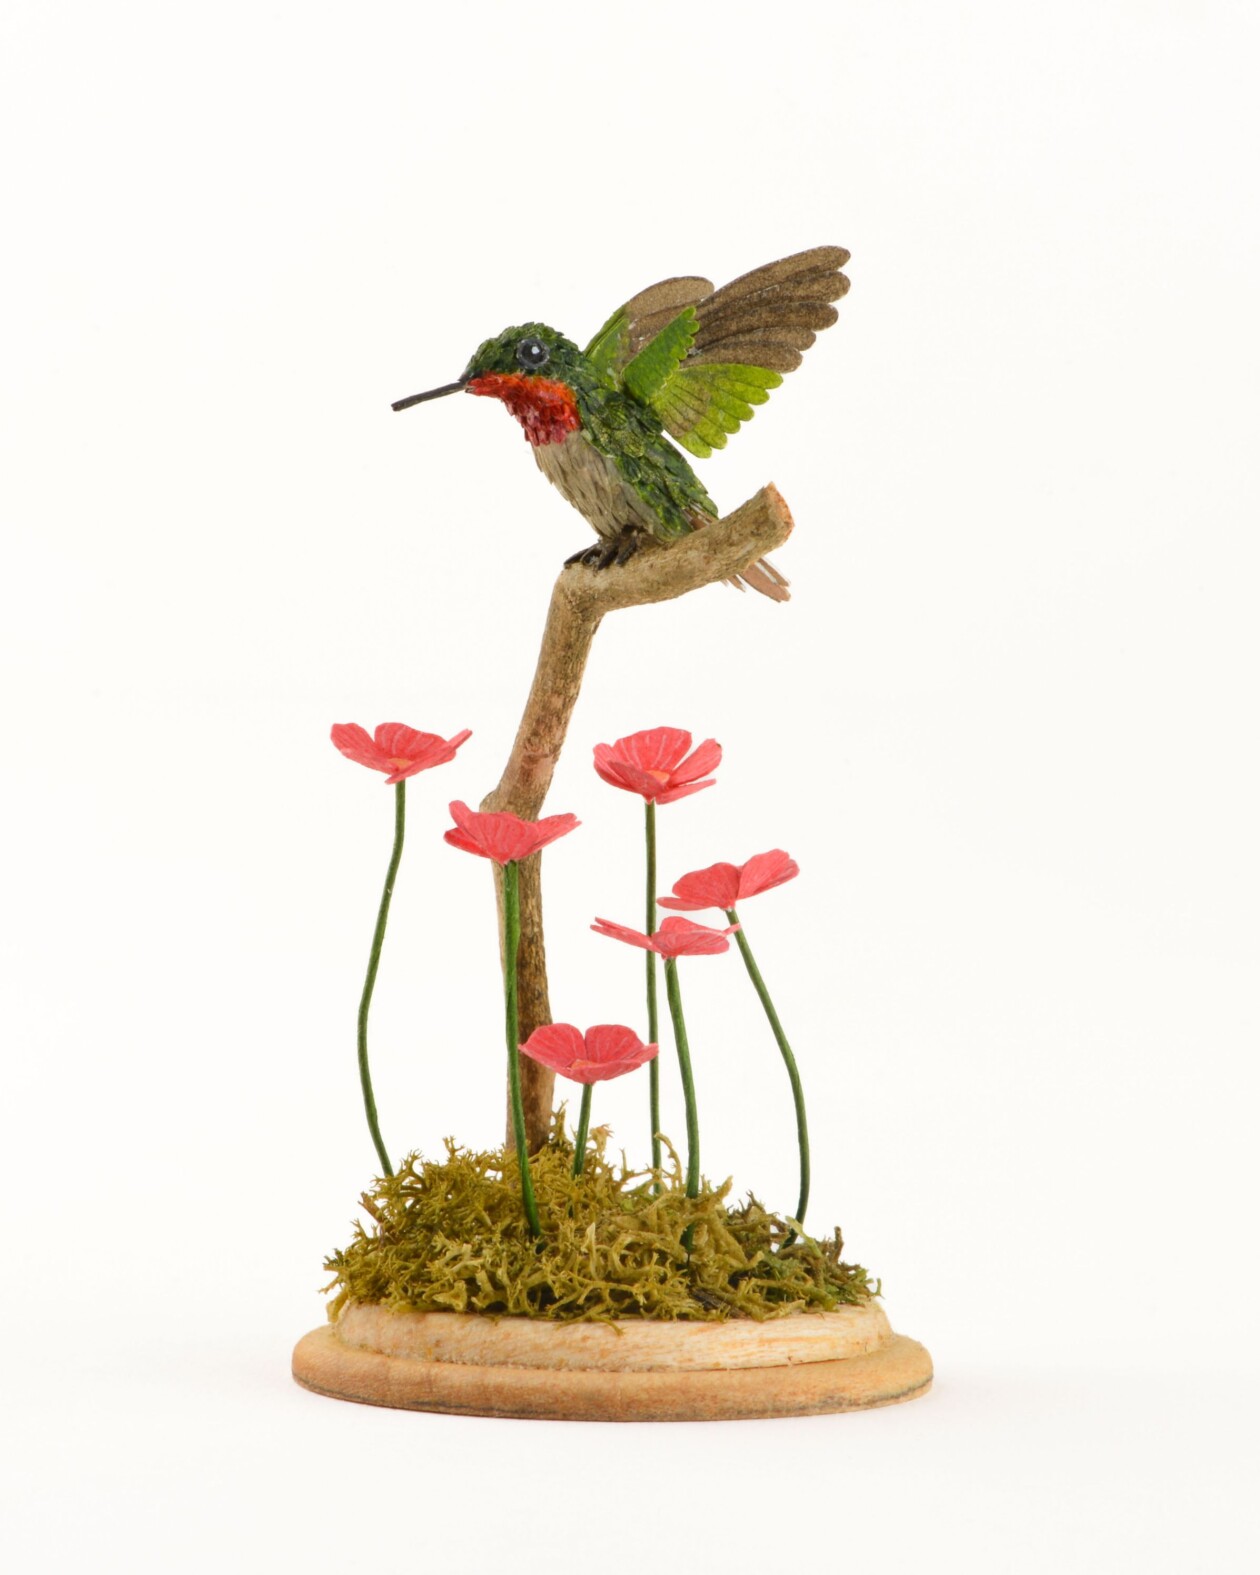 Miniature Bird Paper Sculptures With Whimsical Details By Nayan And Venus (6)